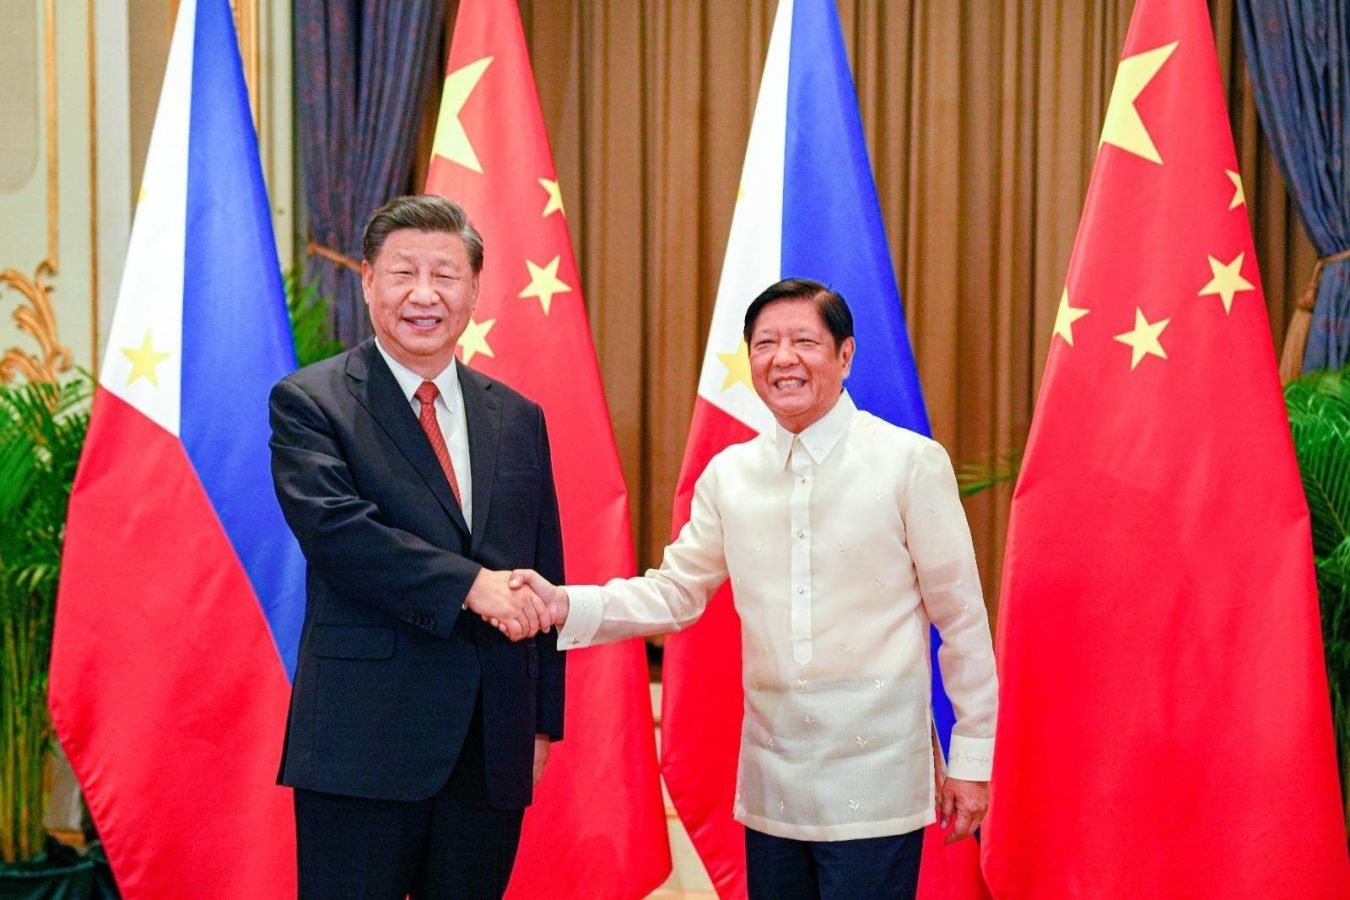 President Ferdinand R. Marcos Jr. expressed elation Thursday after concluding a bilateral meeting with President Xi Jinping in Thailand, his first meeting with the Chinese leader.